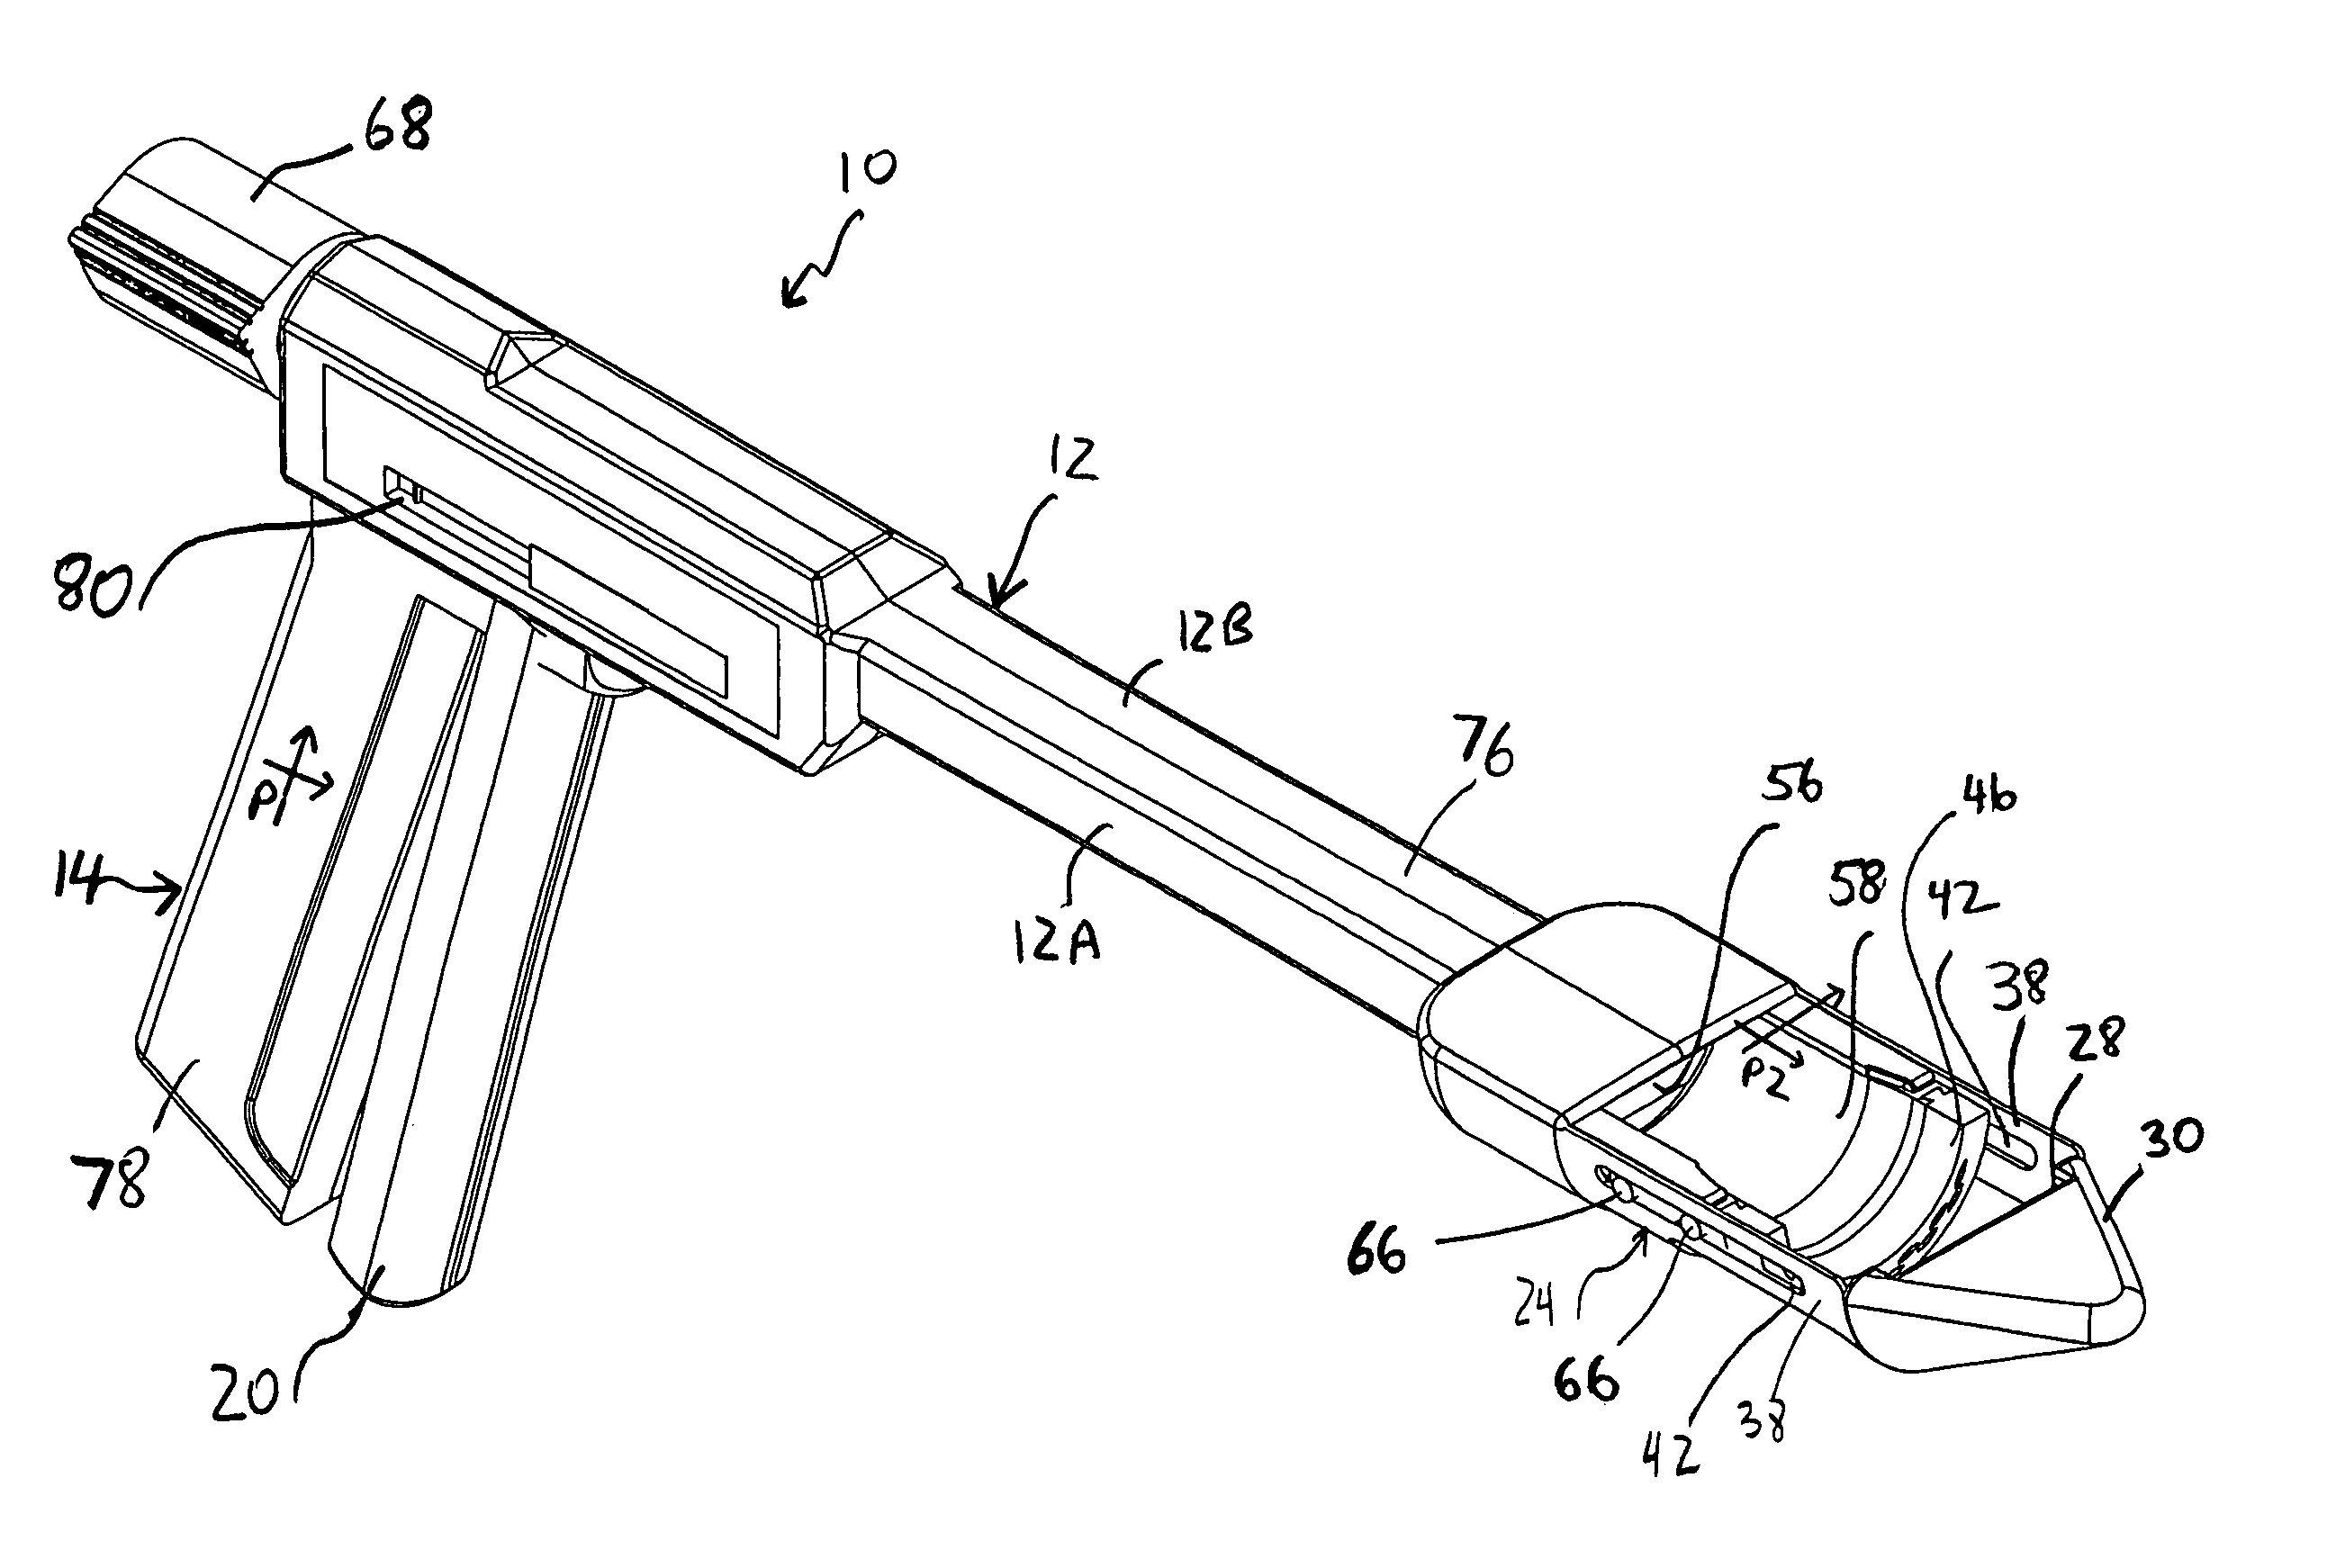 Stapling apparatus having a curved anvil and driver